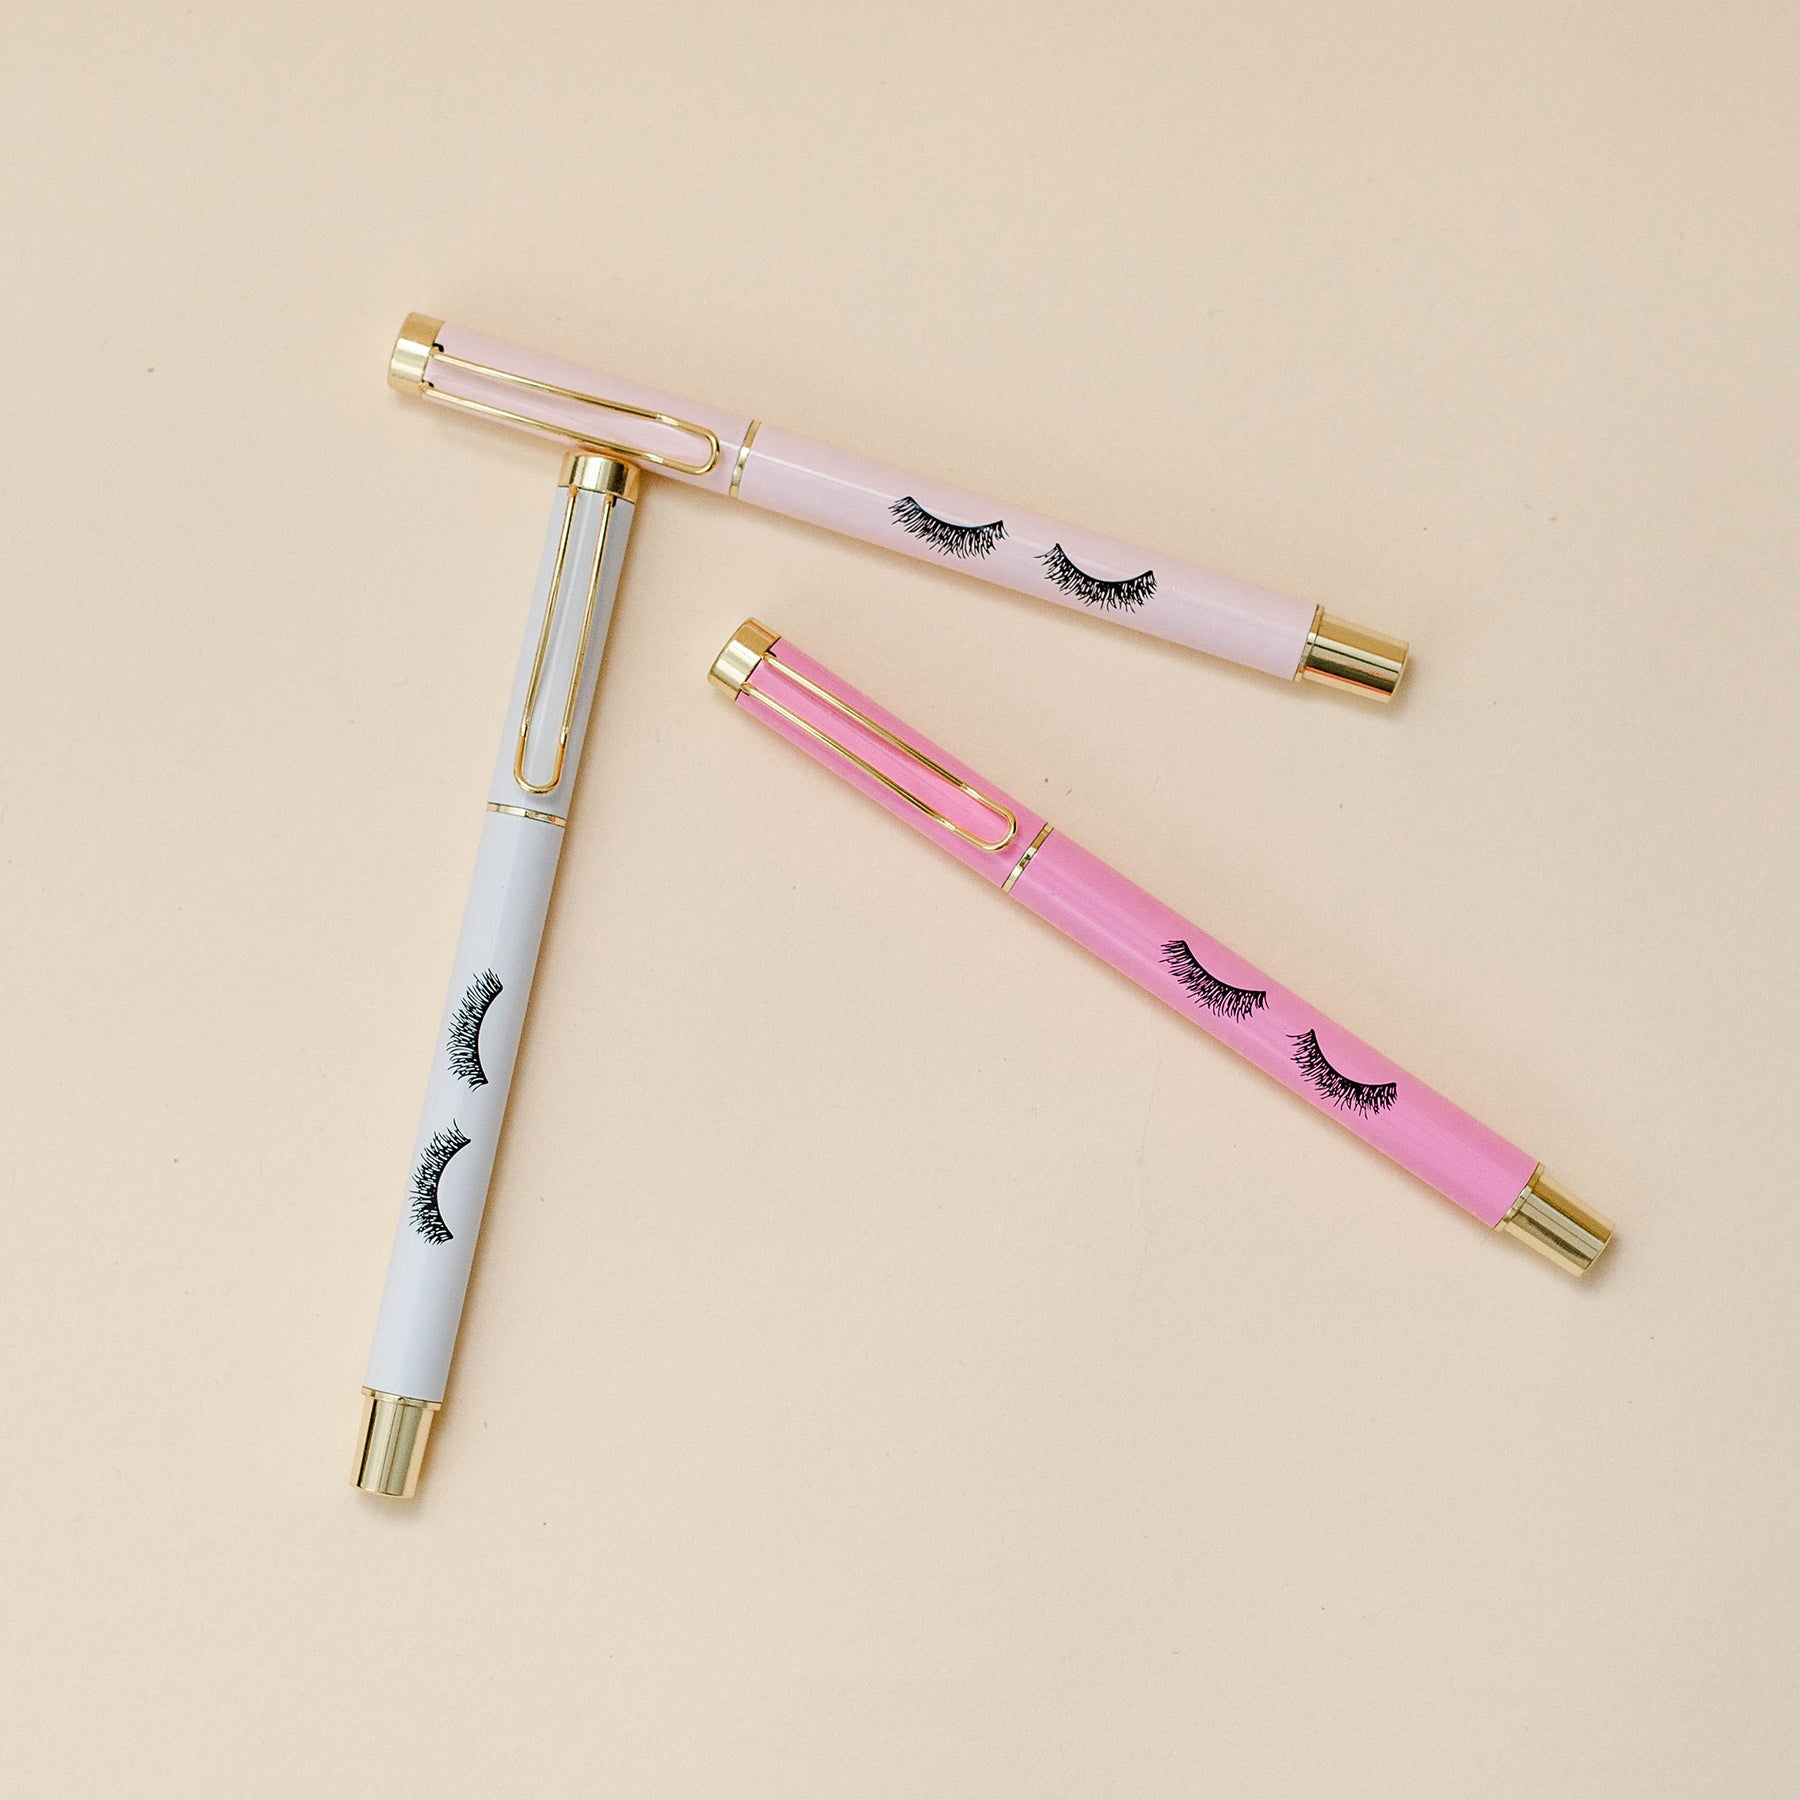 Set of three pens in pink shades (light pink, white, and hot pink) with gold trim and eyelash details